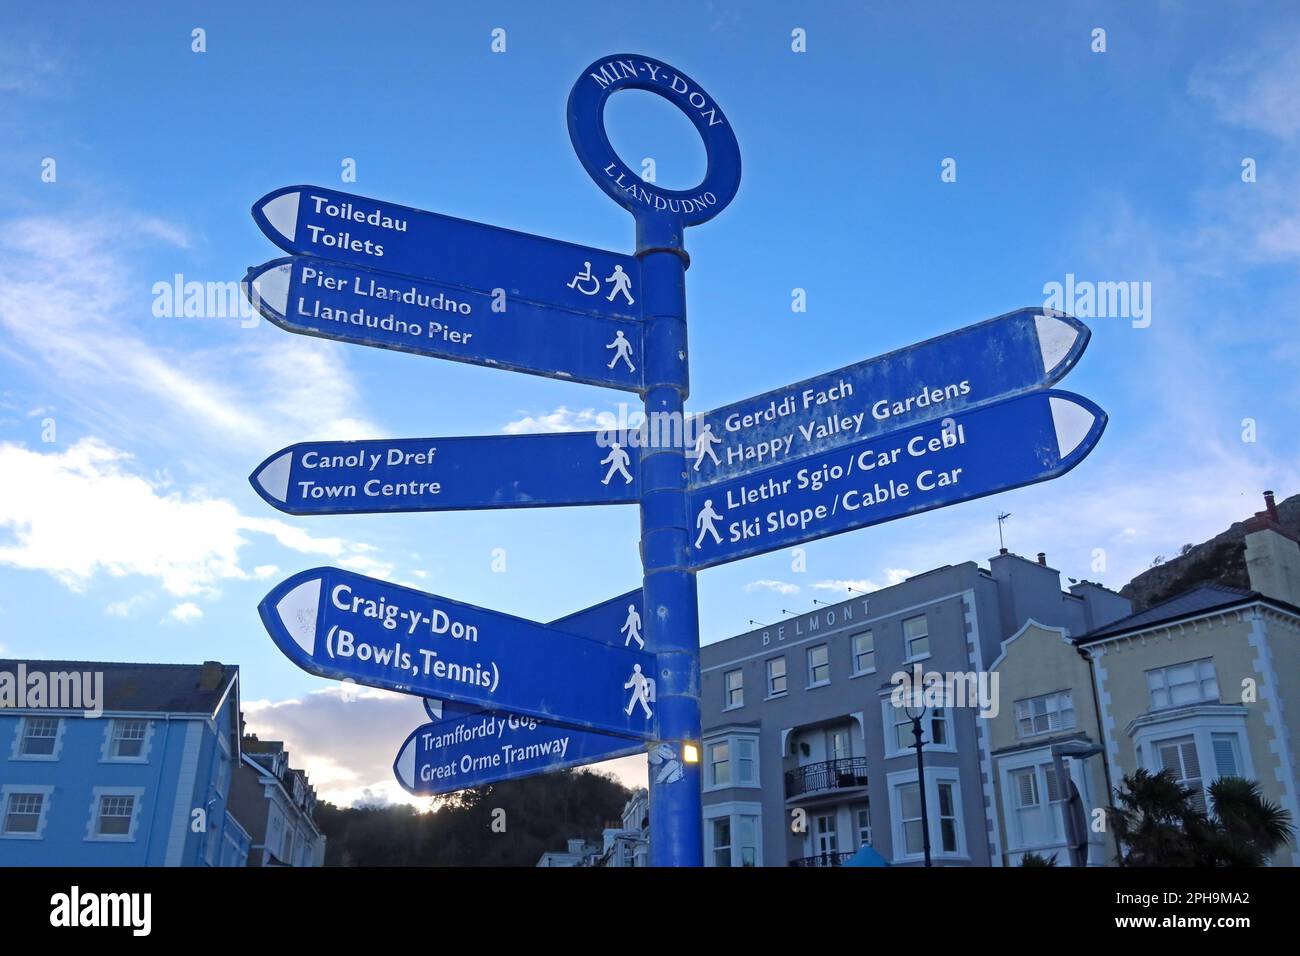 Min-Y-Don - Llandudno attractions, signposted to Pier, Town Centre, Craig-y-Don, Happy Valley Gardens, Ski Slope, Car Cebl, North Wales, UK , LL30 2LP Stock Photo